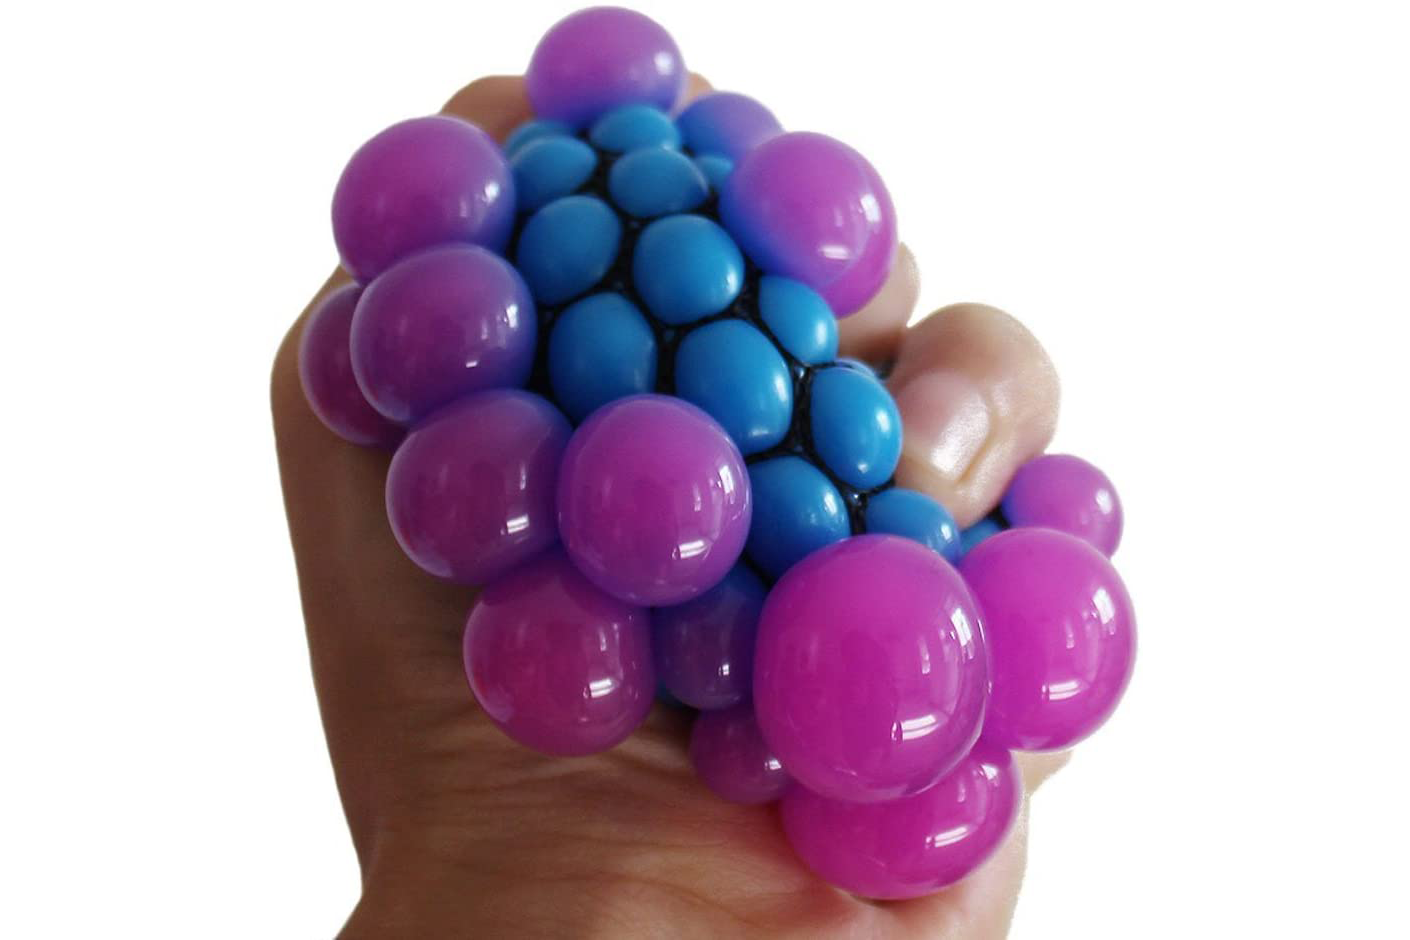 WeFidget's Rubber Grape Ball Hand Wrist Squeeze Toy Stress Autism Mood Relief